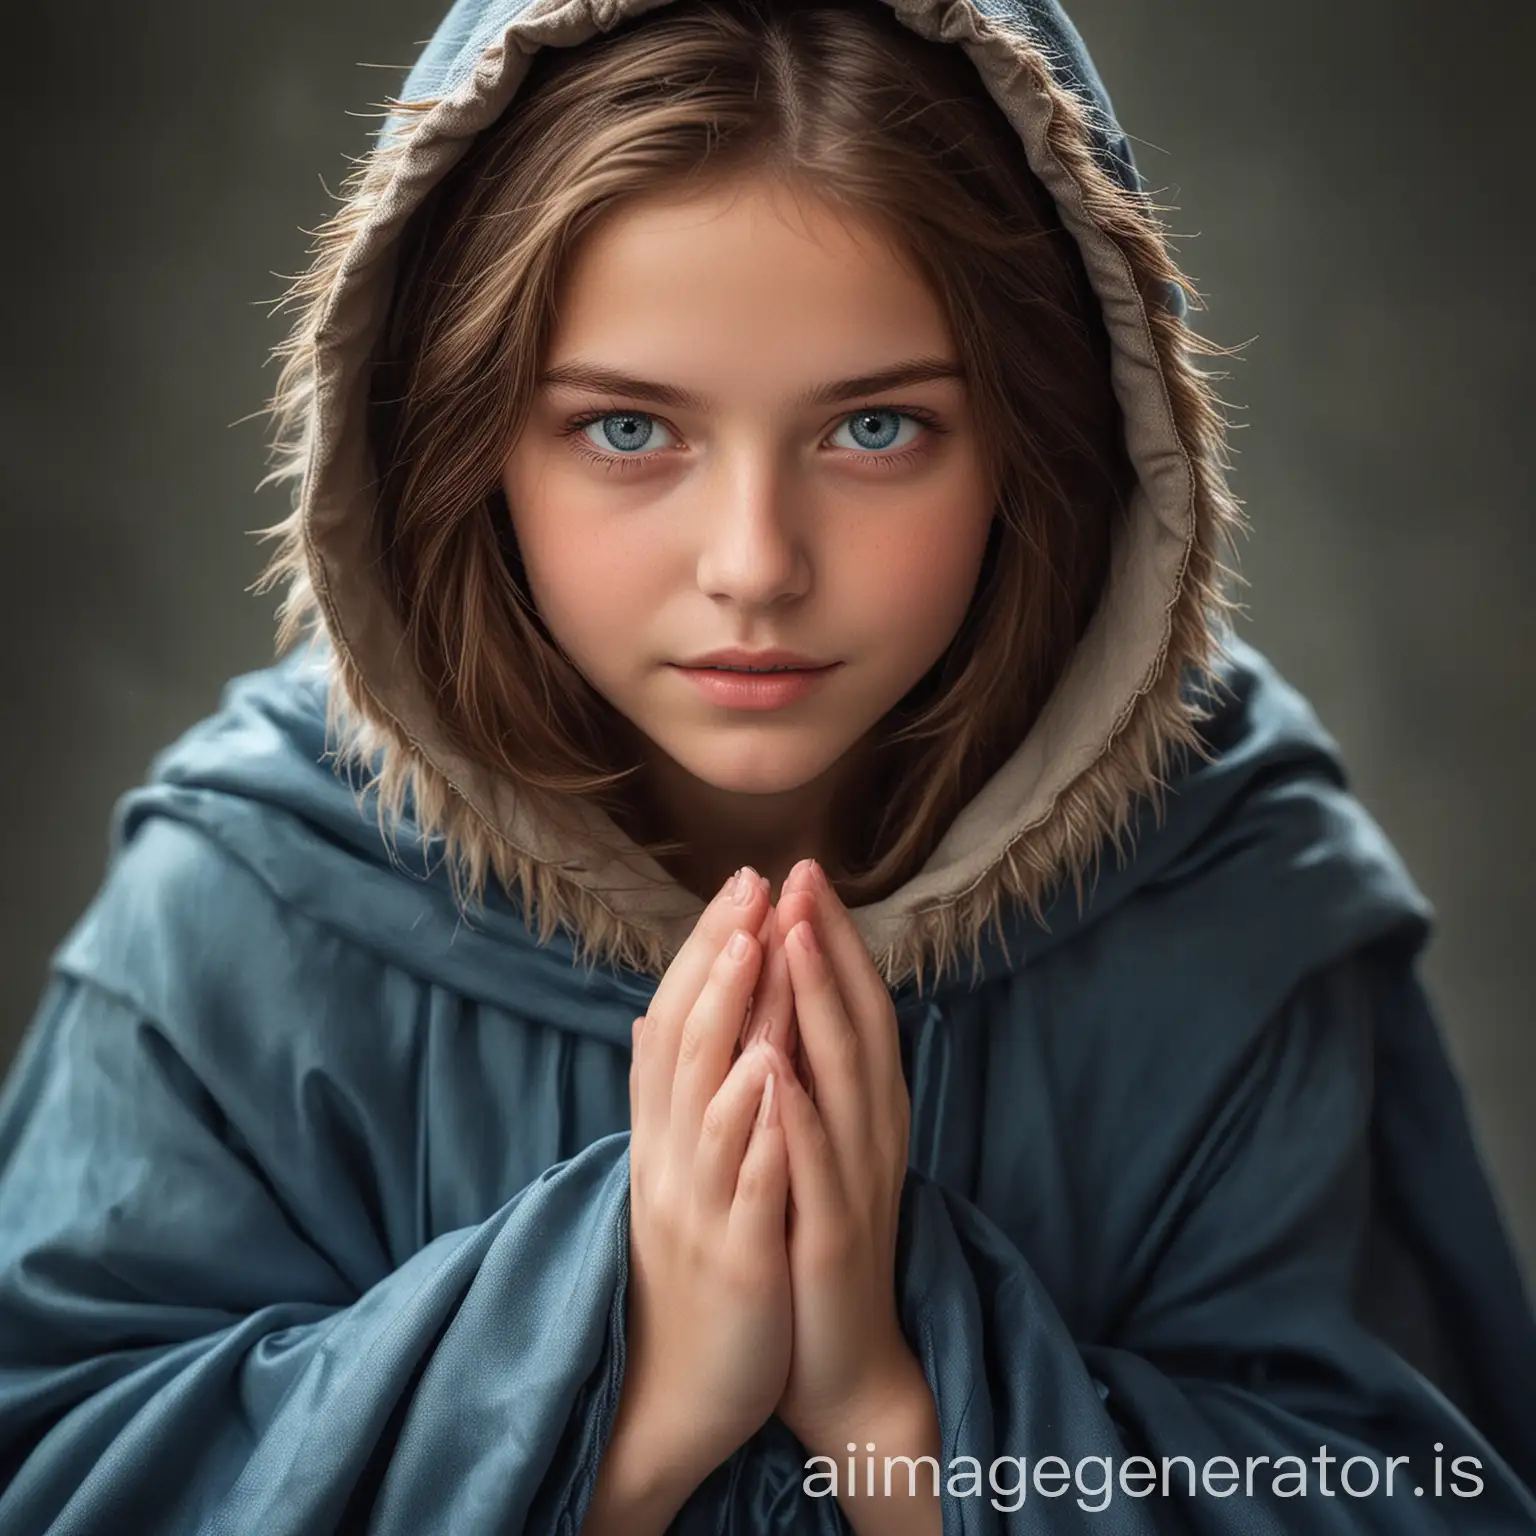 Teenage-Girl-with-Feathered-Hands-Brown-Hair-and-Blue-Eyes-in-Blue-Cloak